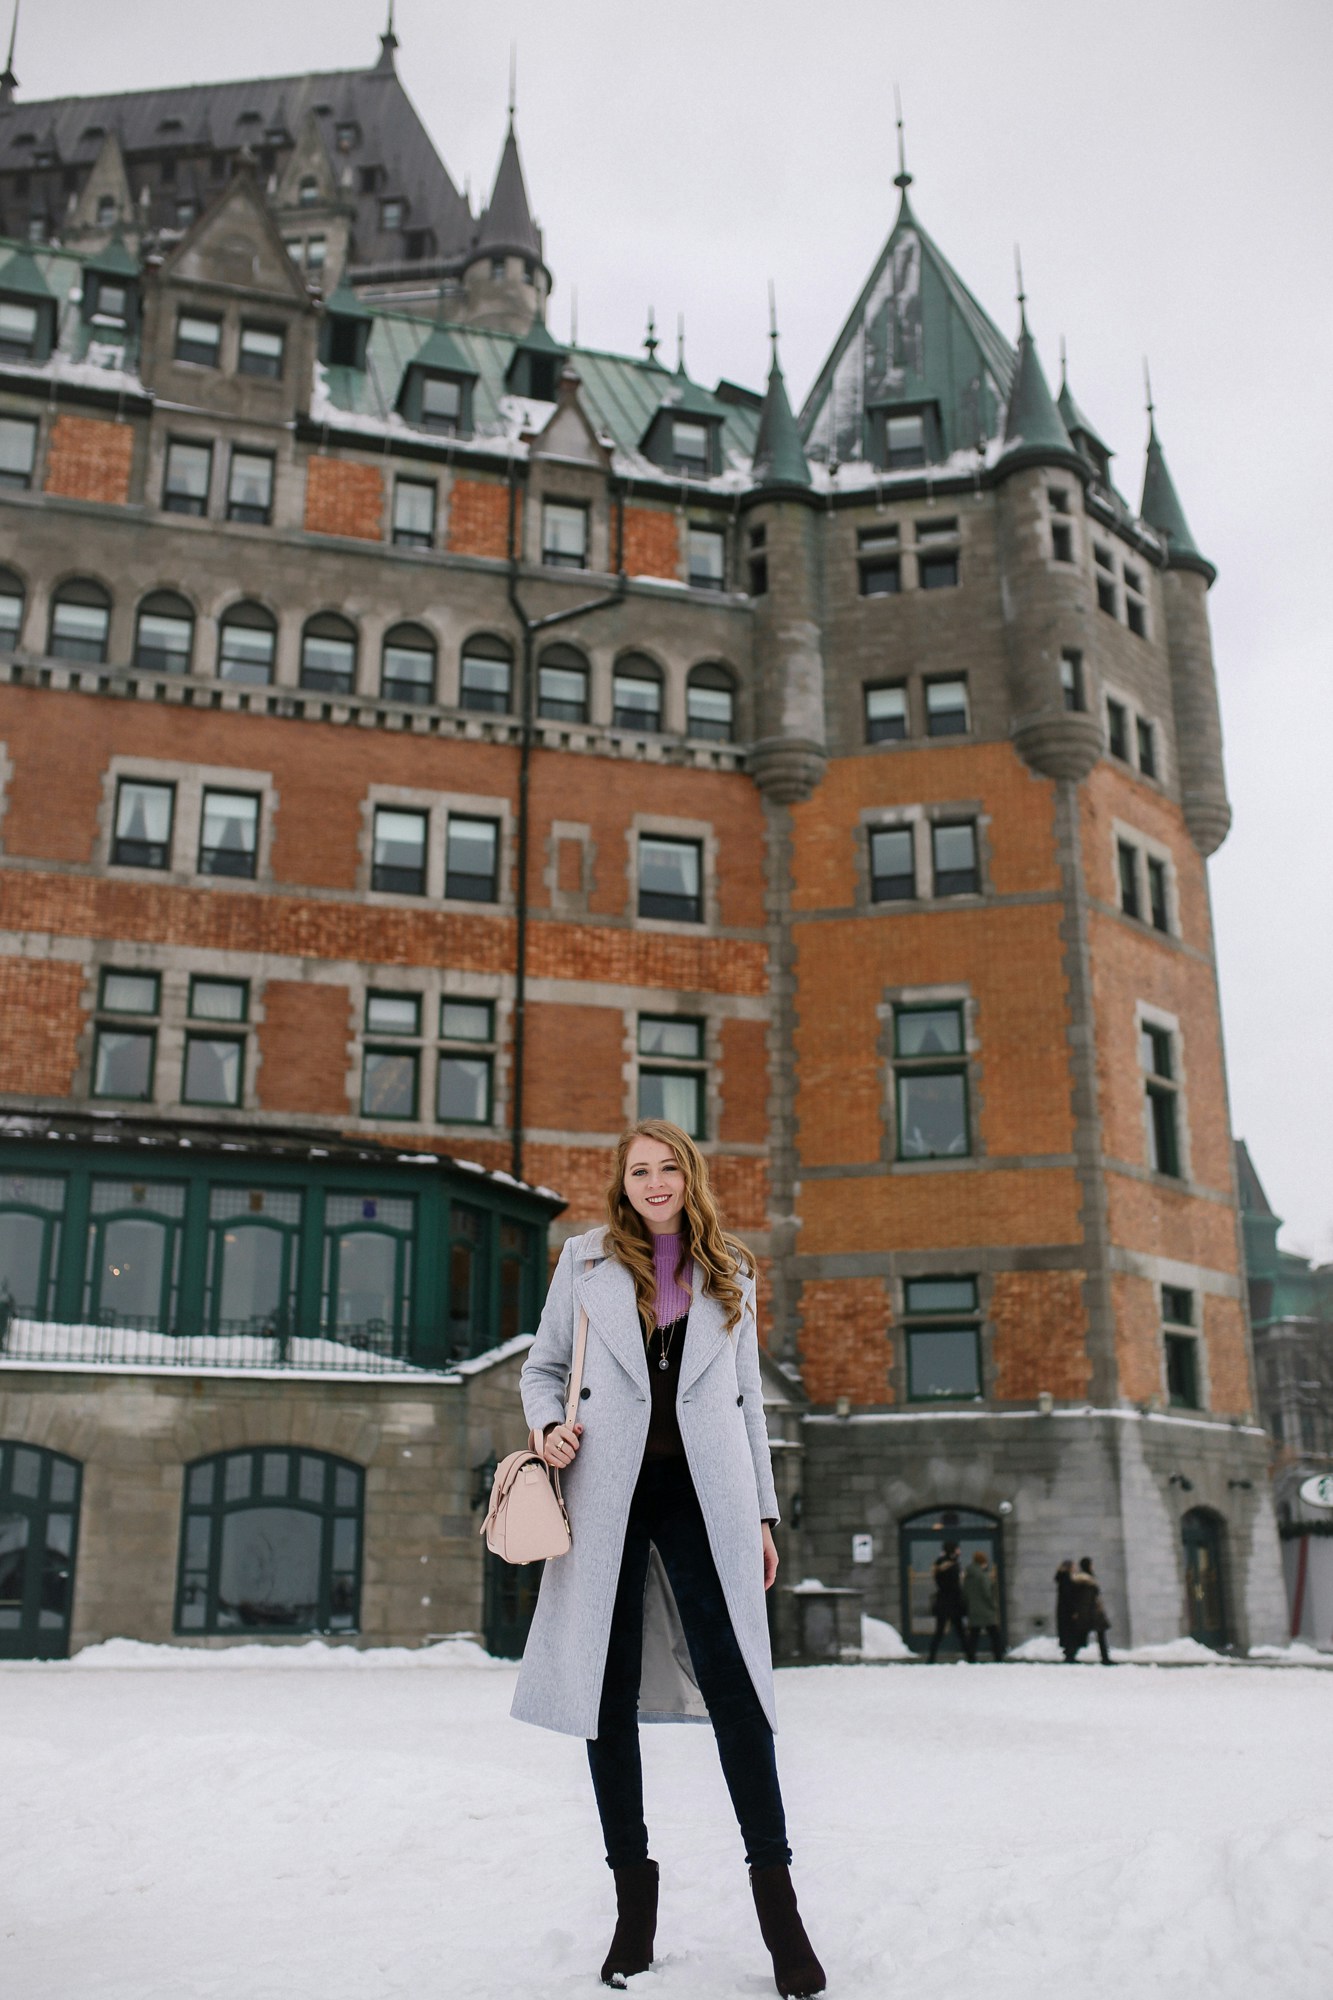 Best Canadian Winter Boots - the La Canadienne Jojo Style is so chic. I wore them all over Quebec City and they kept my feet dry and cozy!